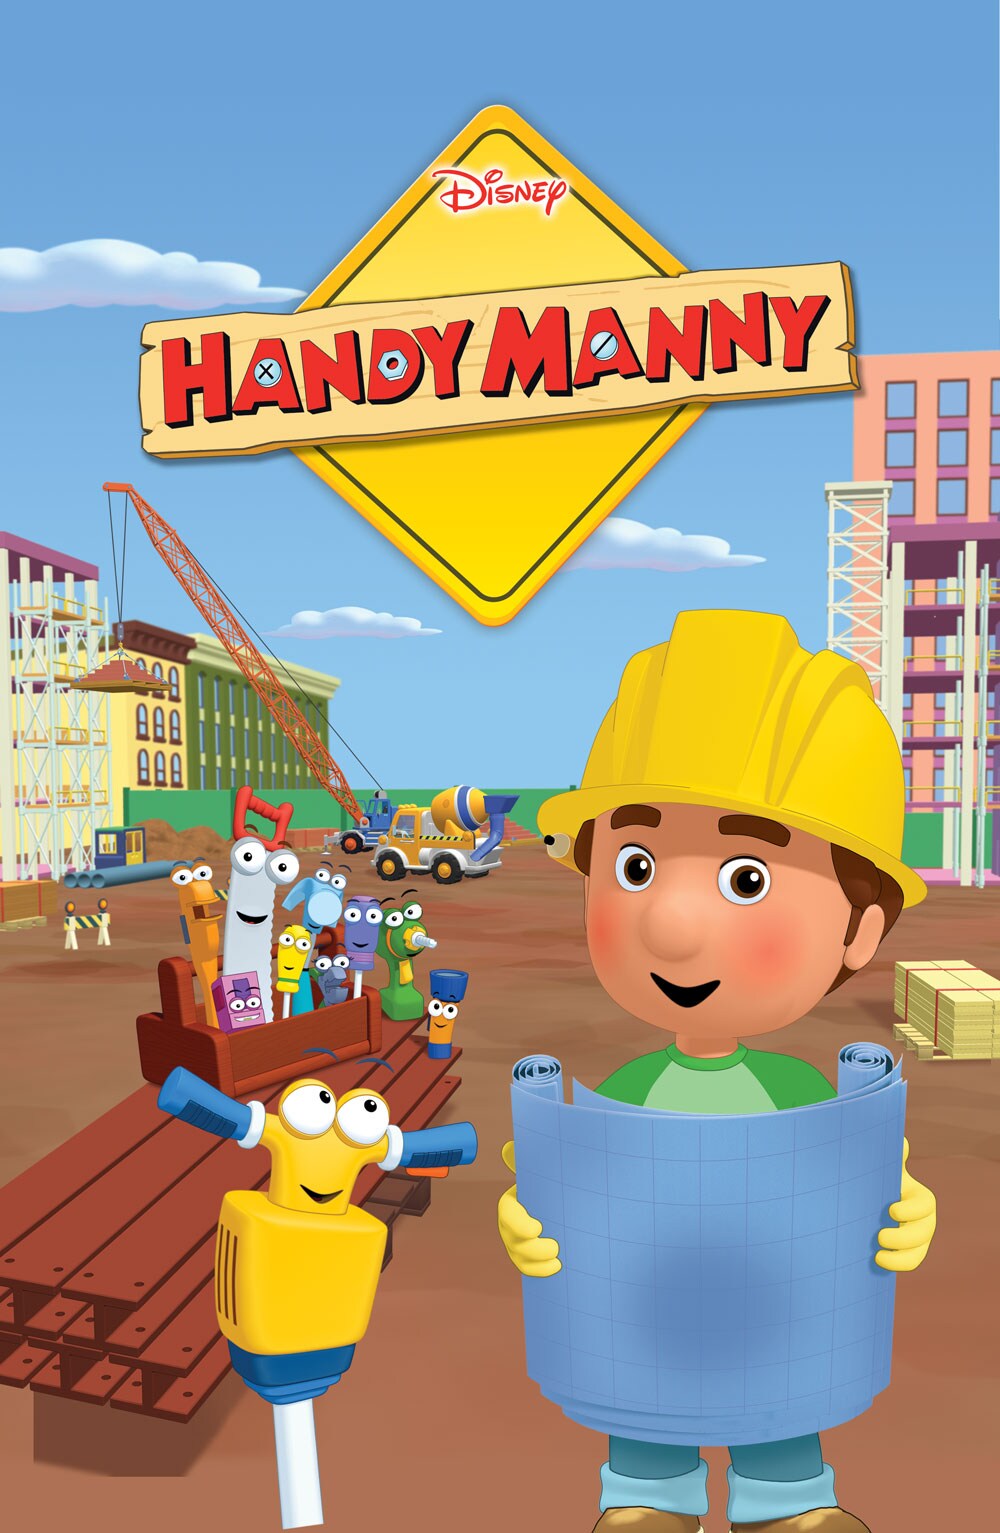 handy manny characters